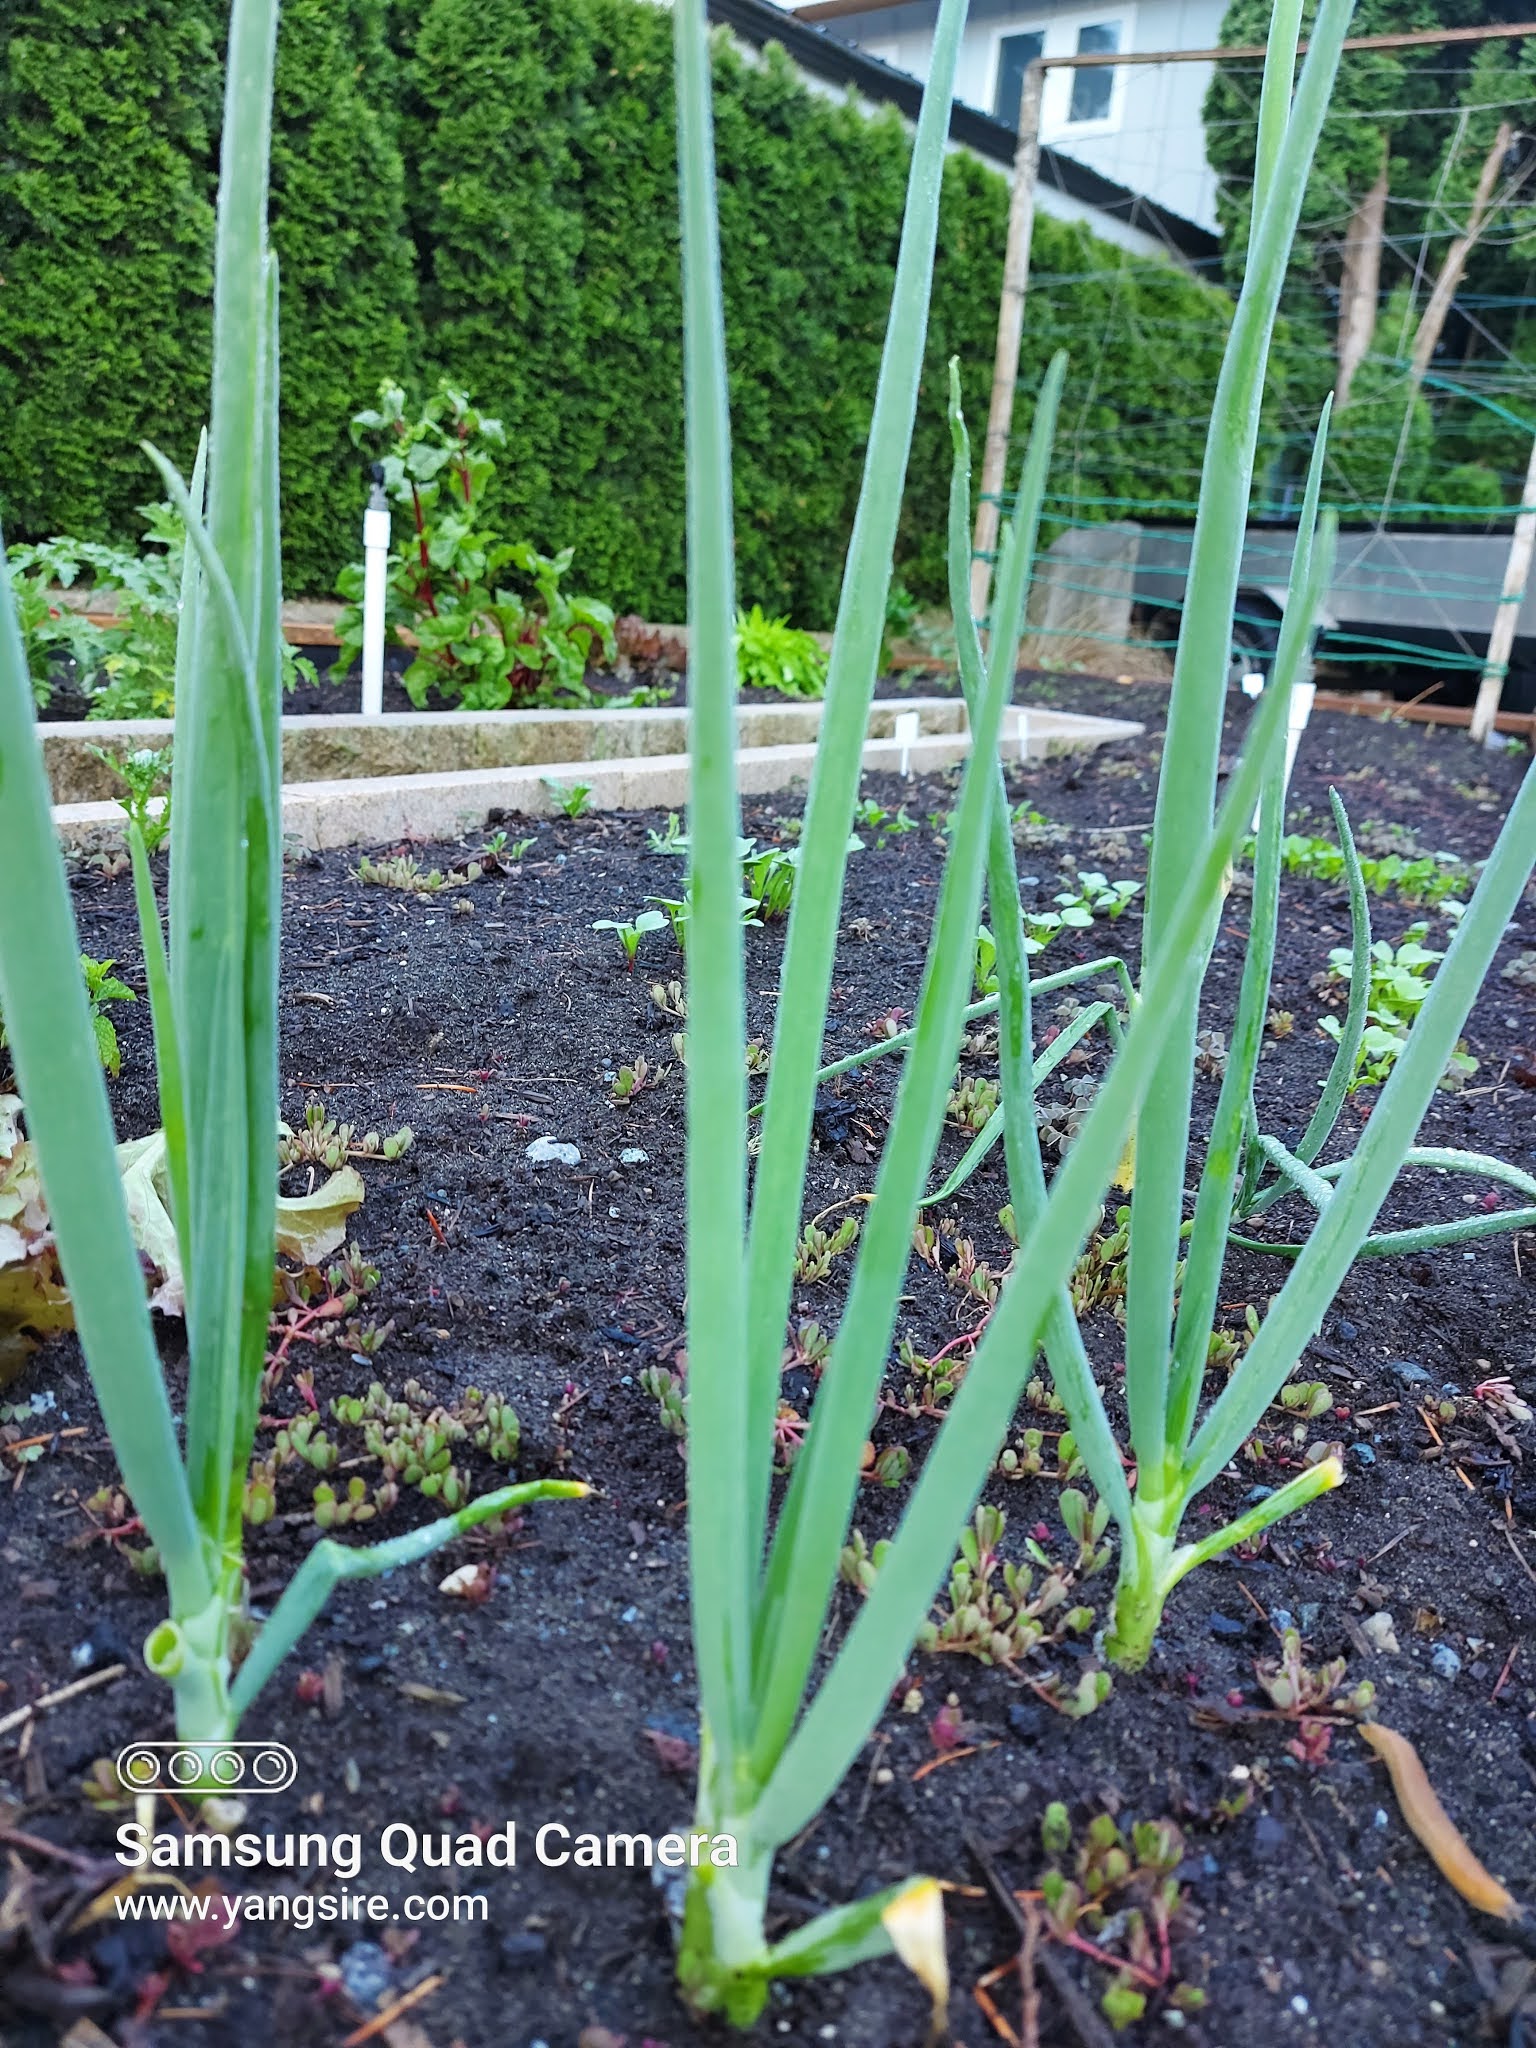 Green onions or we called it spring onions